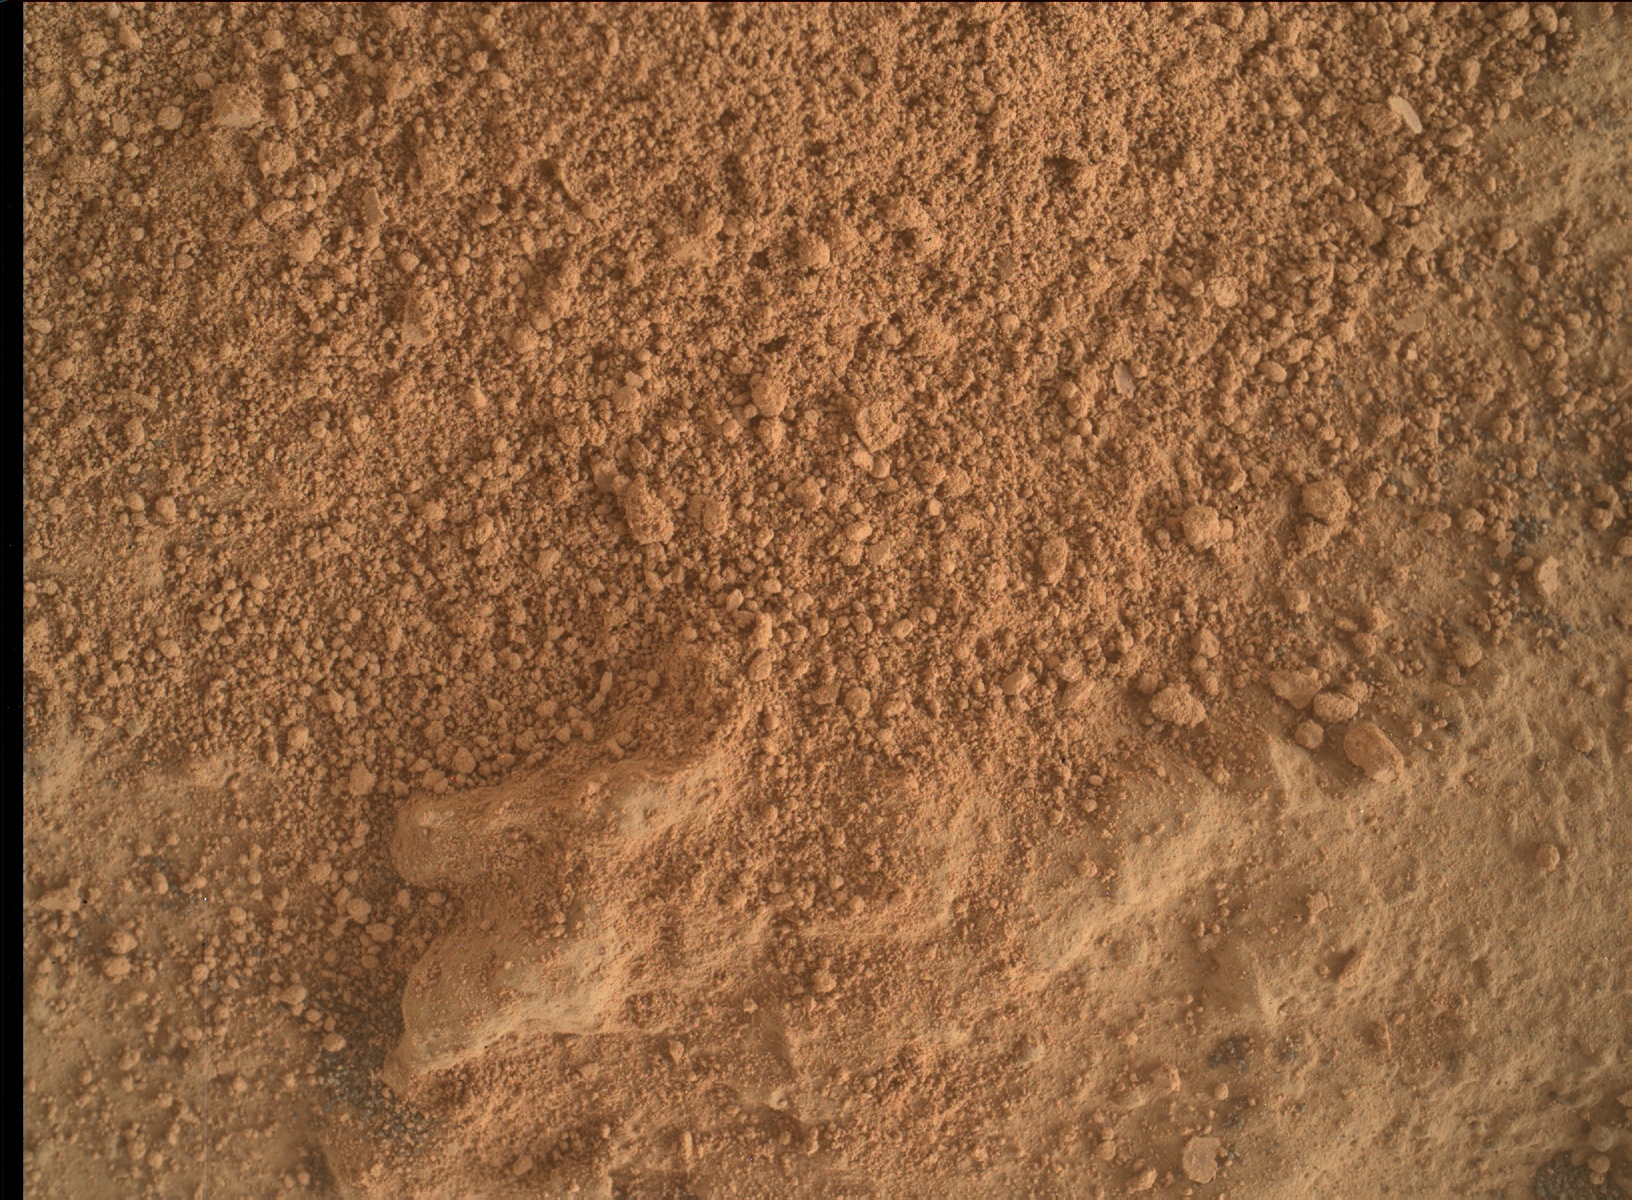 Nasa's Mars rover Curiosity acquired this image using its Mars Hand Lens Imager (MAHLI) on Sol 3178